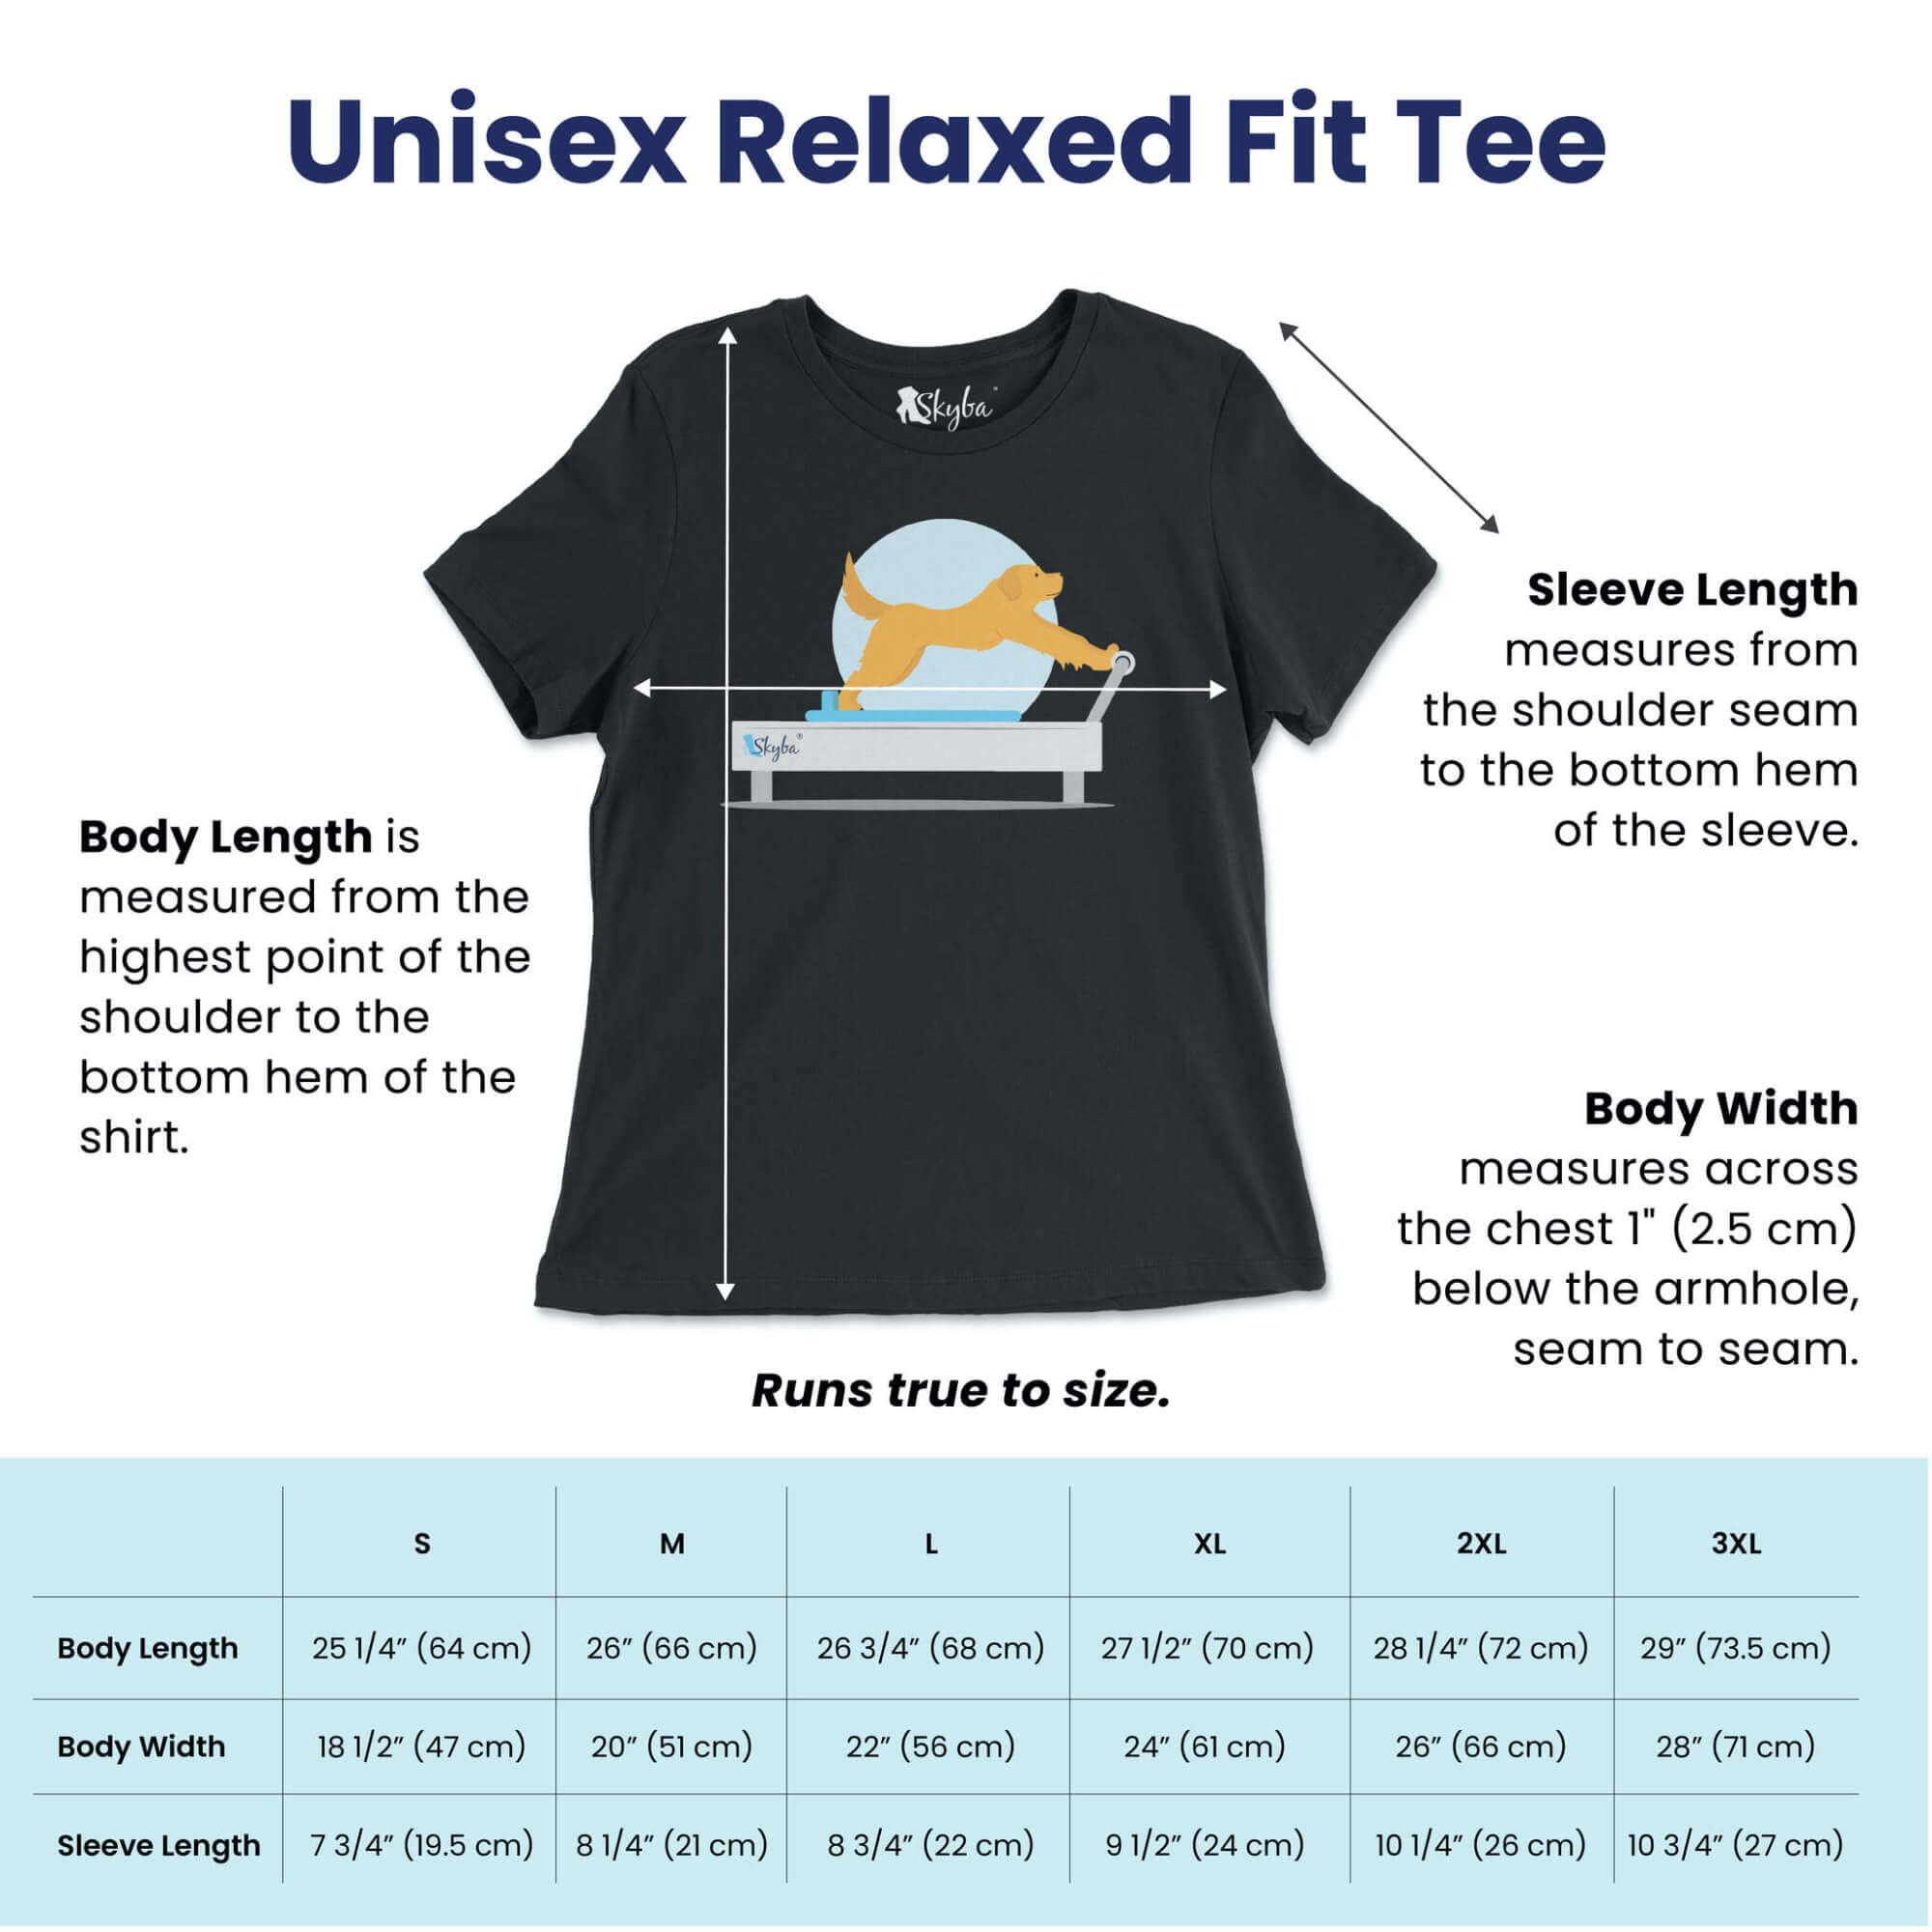 Pilates Feet in Straps - Classic Tee